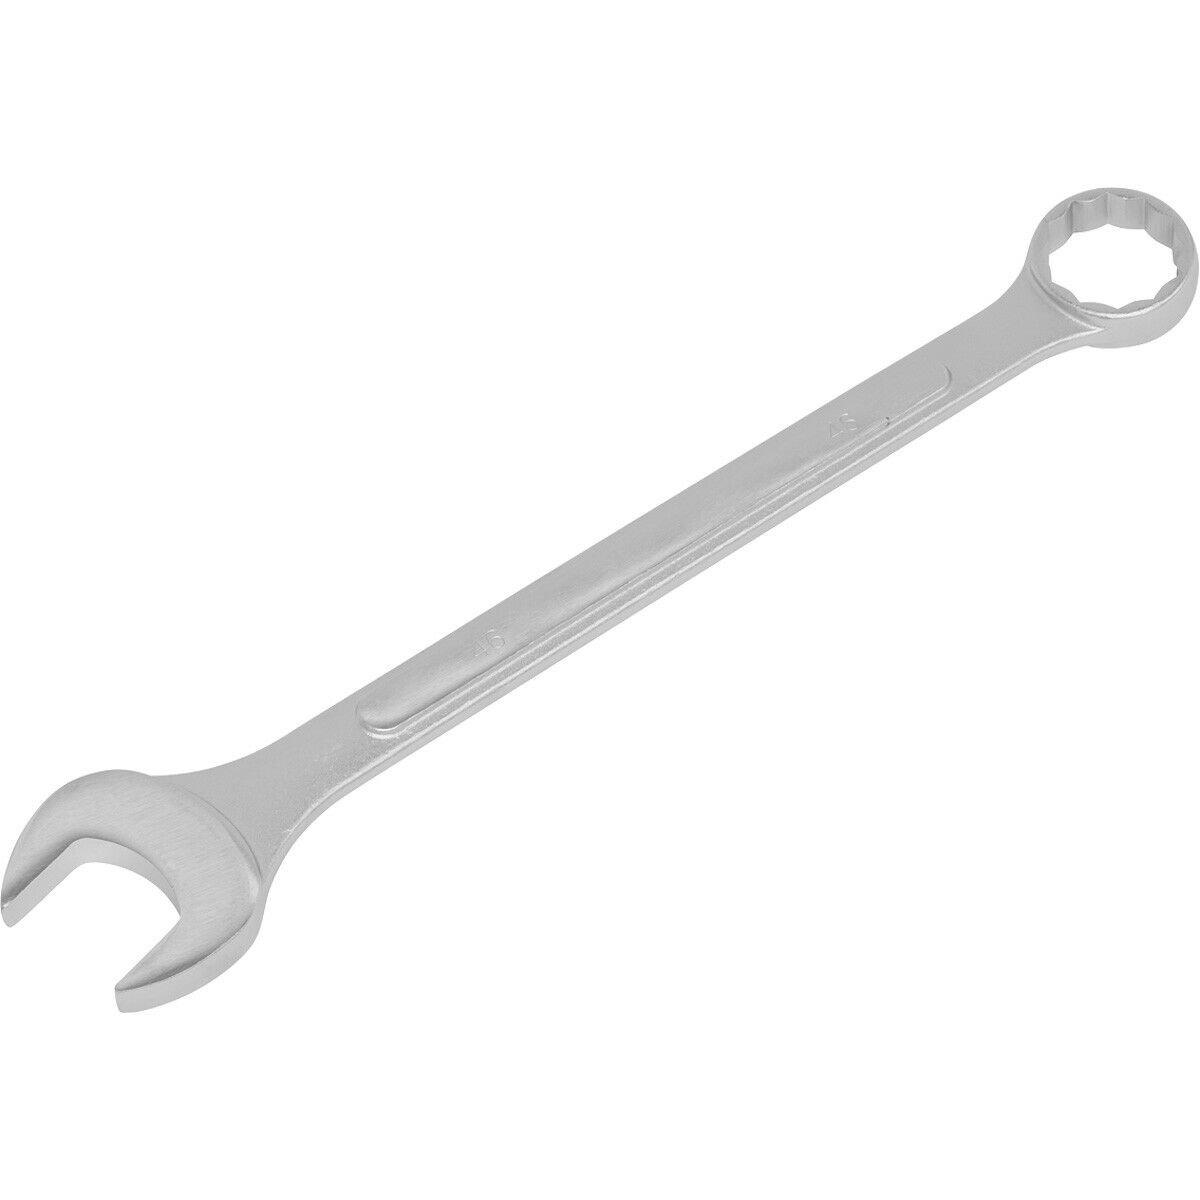 46mm Large Combination Spanner - Drop Forged Steel - Chrome Plated Polished Jaws